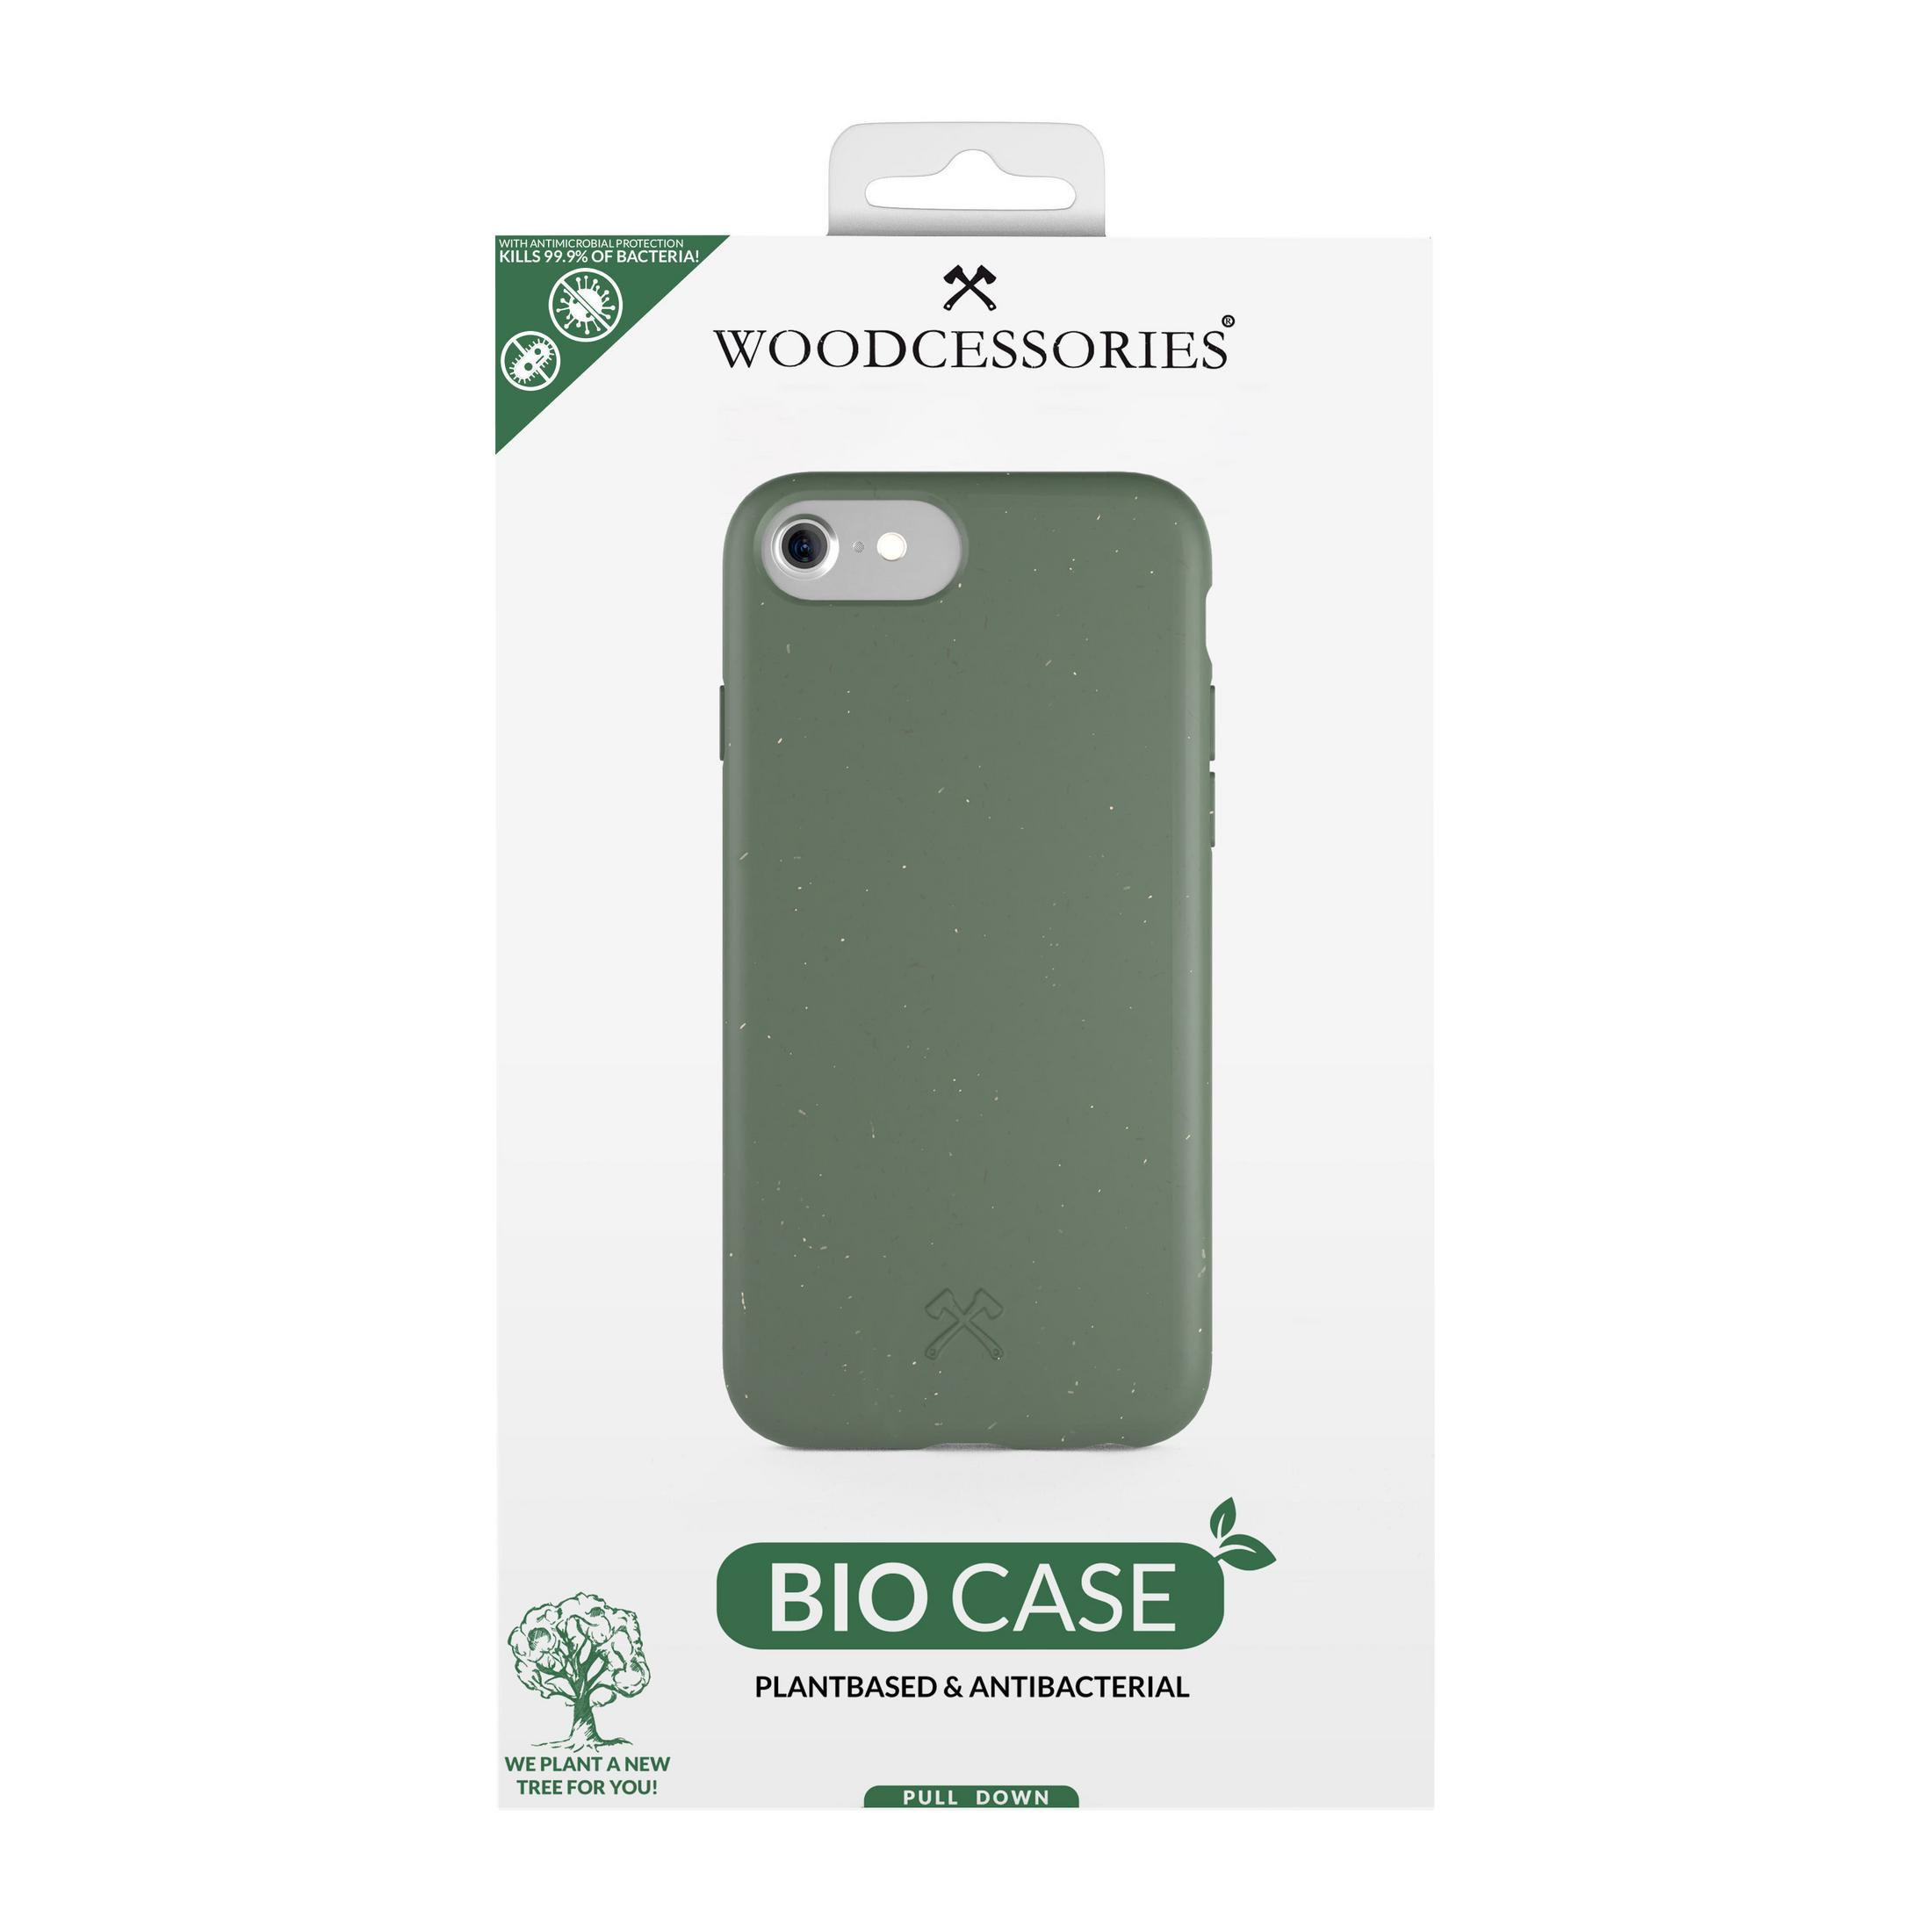 8 CASE ANTIMICROBIAL BIO 6 ECO425 SE 7, iPhone 7 SE, IP 6, Grün Backcover, 8, GREEN, WOODCESSORIES Apple,